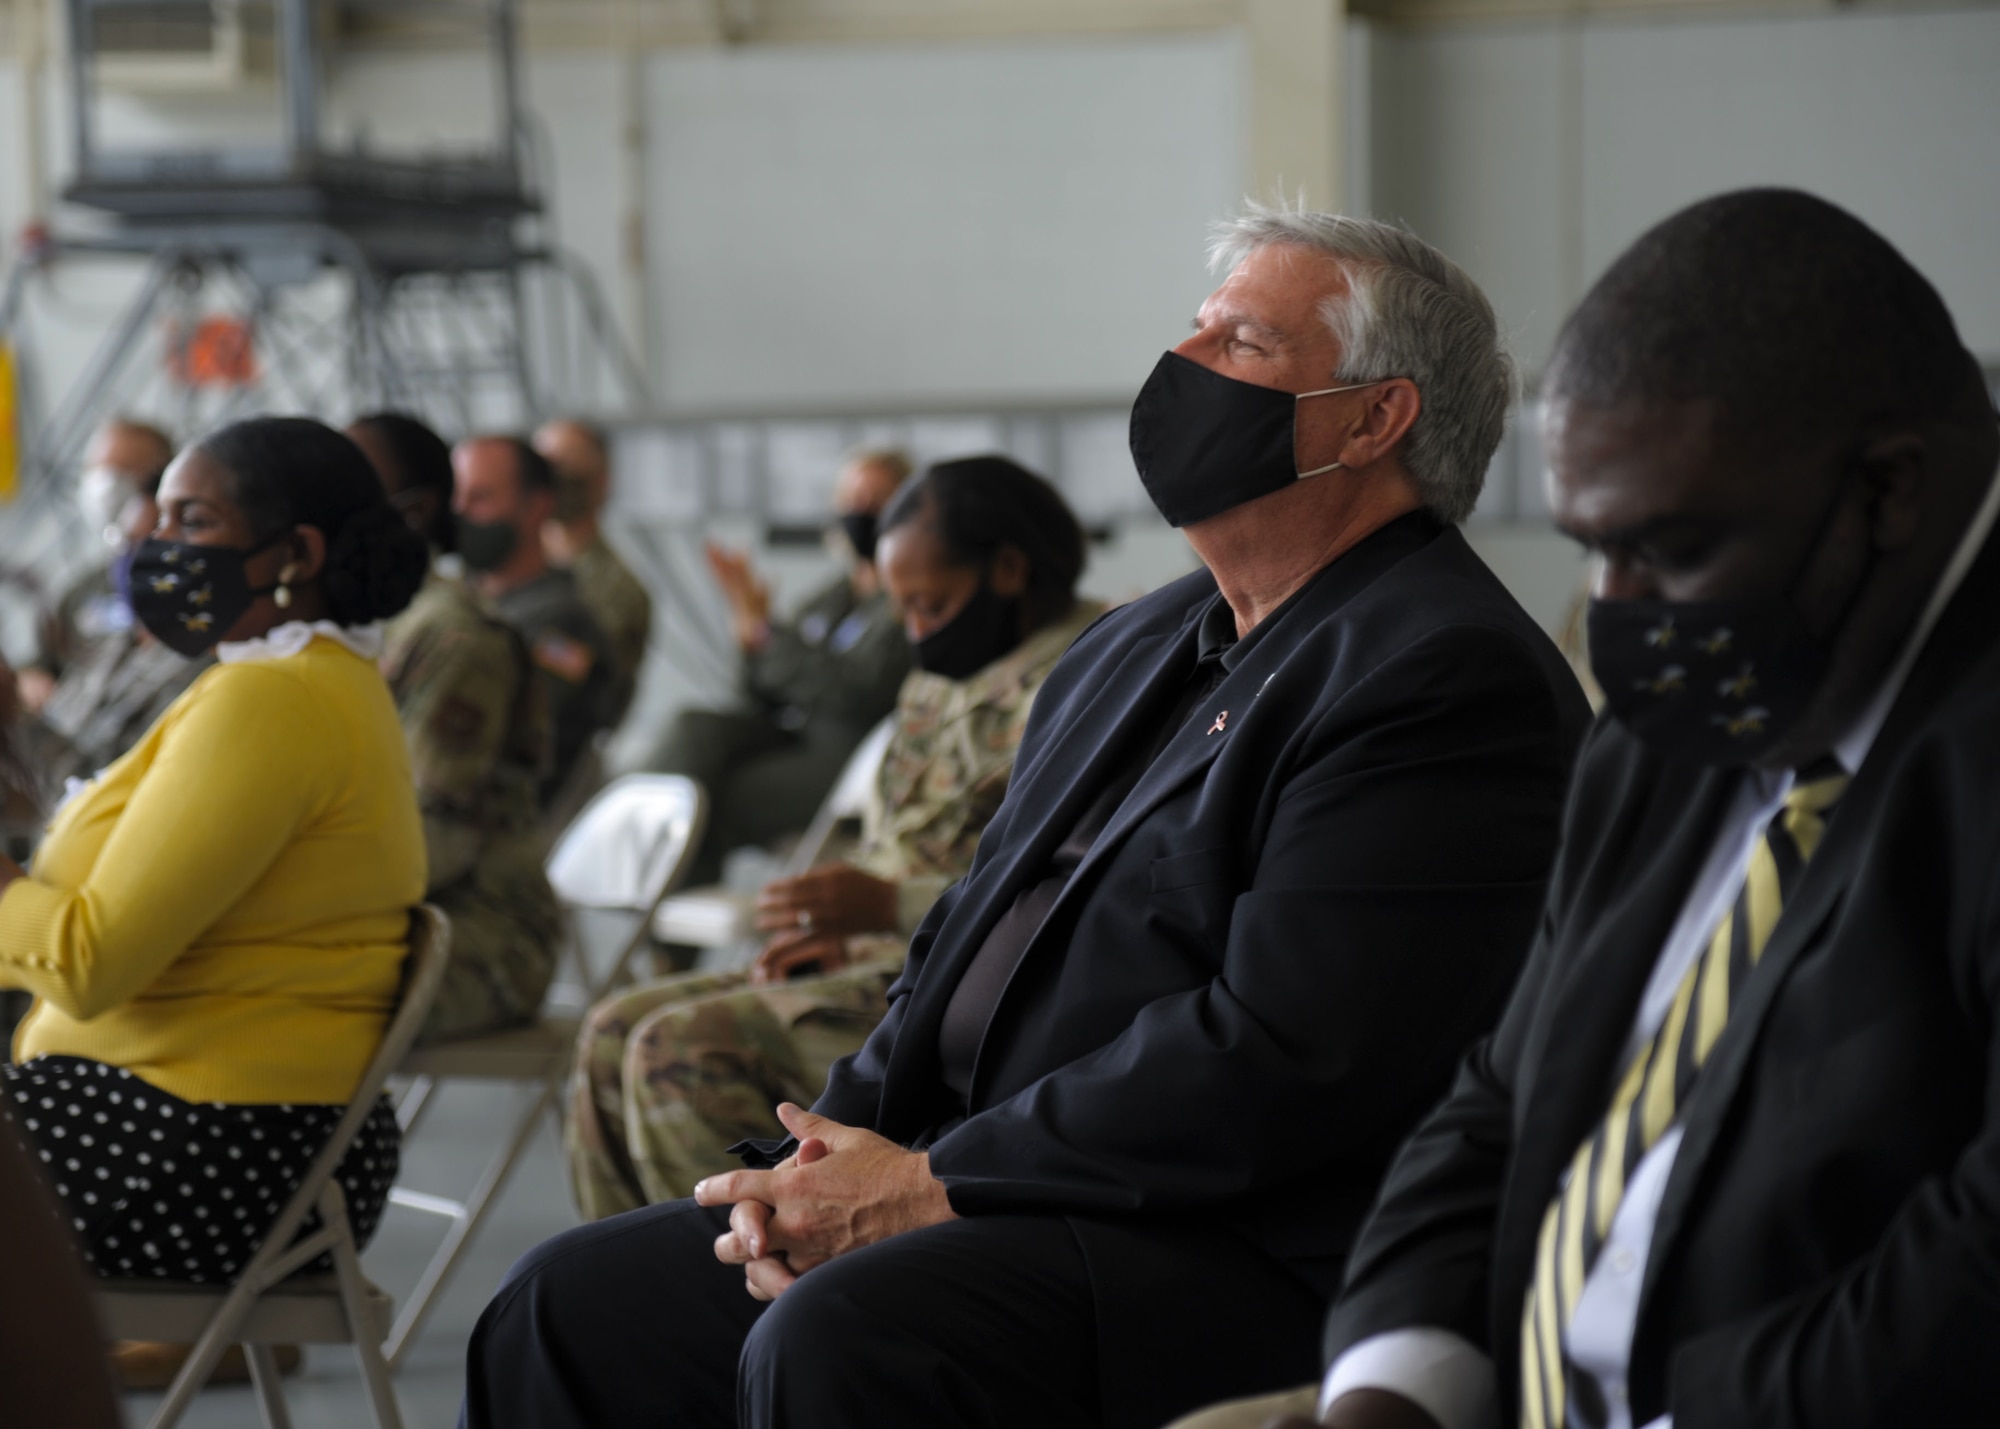 Members of the 908th Airlift Wing and representatives of Alabama State University attend the nose art unveiling ceremony at Maxwell Air Force Base, Alabama. The 908th AW commemorated its partnership with ASU by painting the university’s logo on the nose of one of its C-130 H aircraft. (U.S. Air Force photo by Senior Airman Max Goldberg)